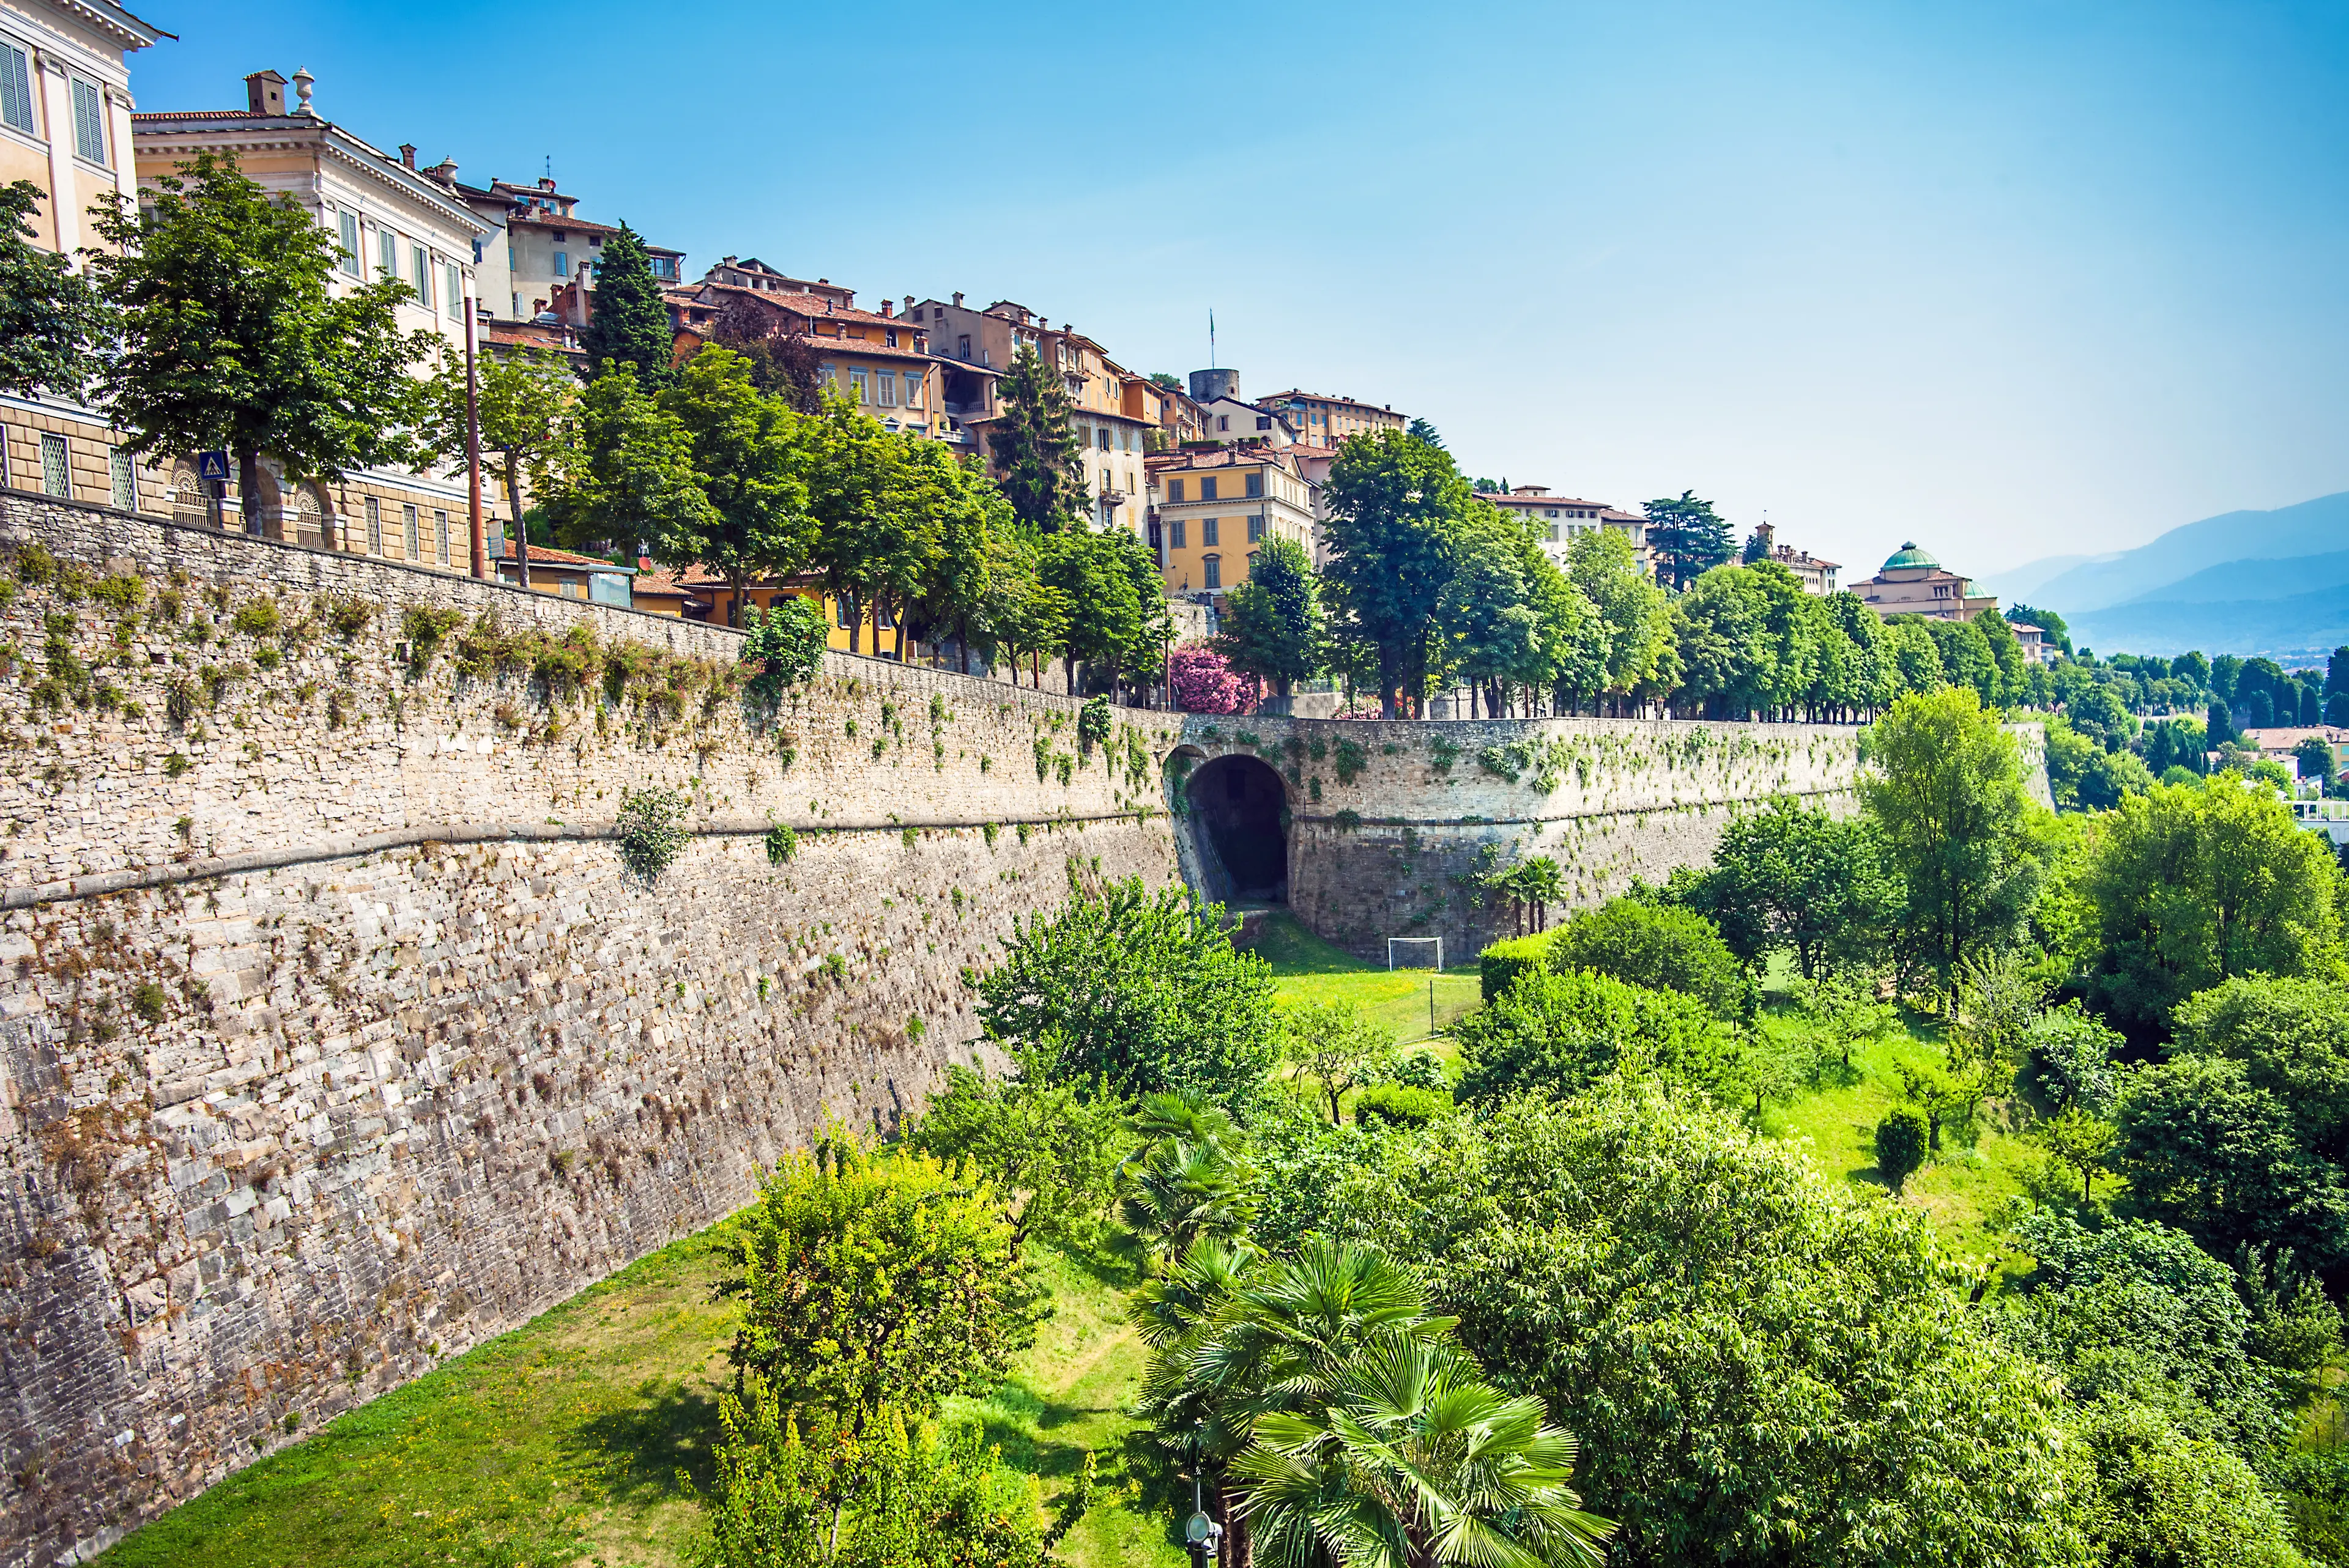 2-Day Bergamo Adventure: Sightseeing and Wine Tasting with Friends